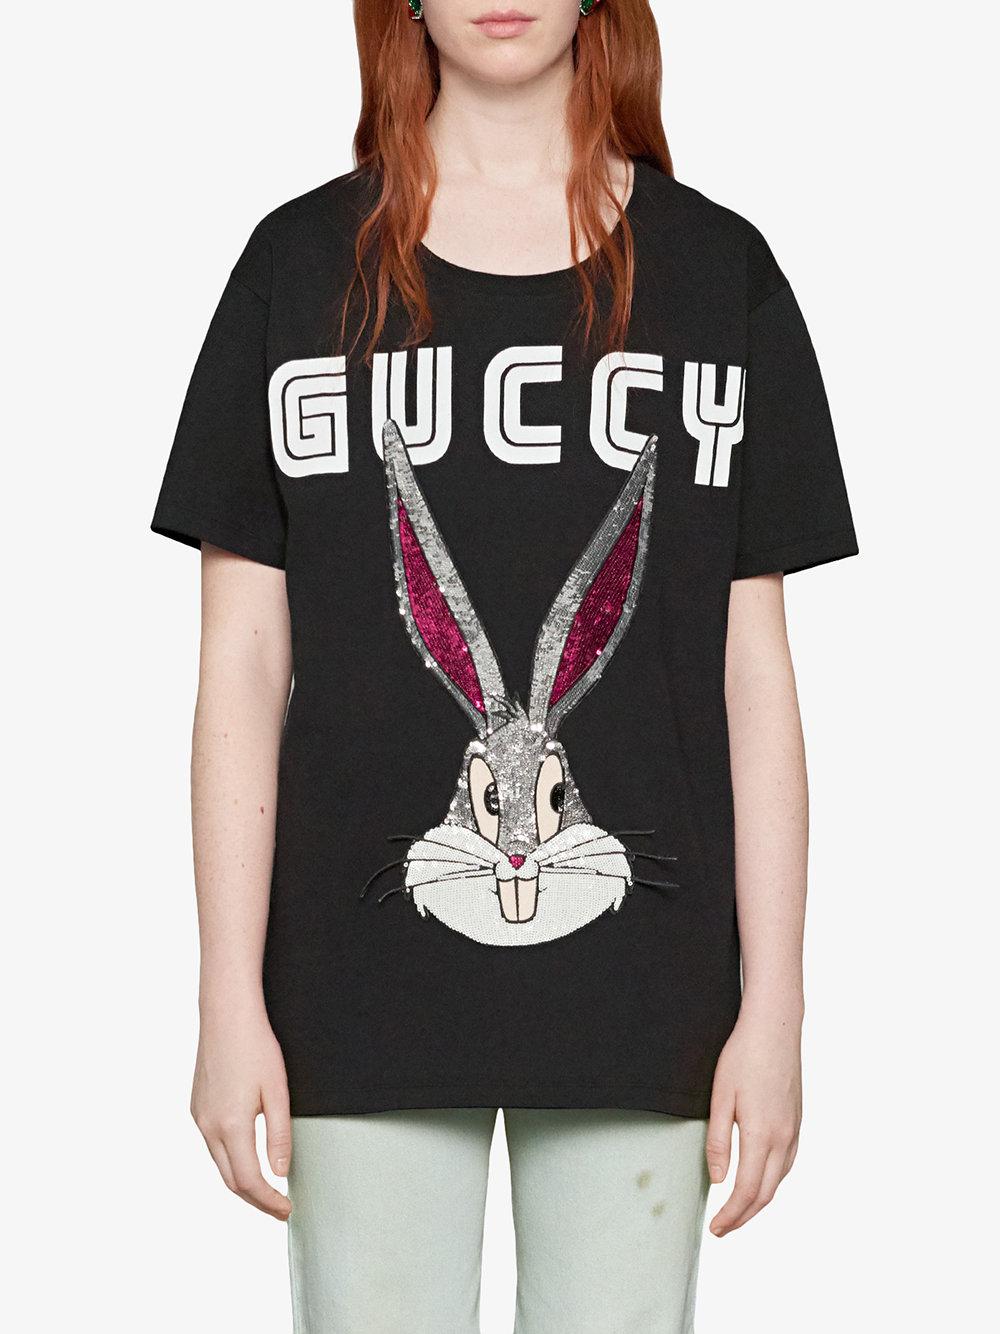 Gucci Bugs Bunny Cotton T-shirt in Black - Lyst